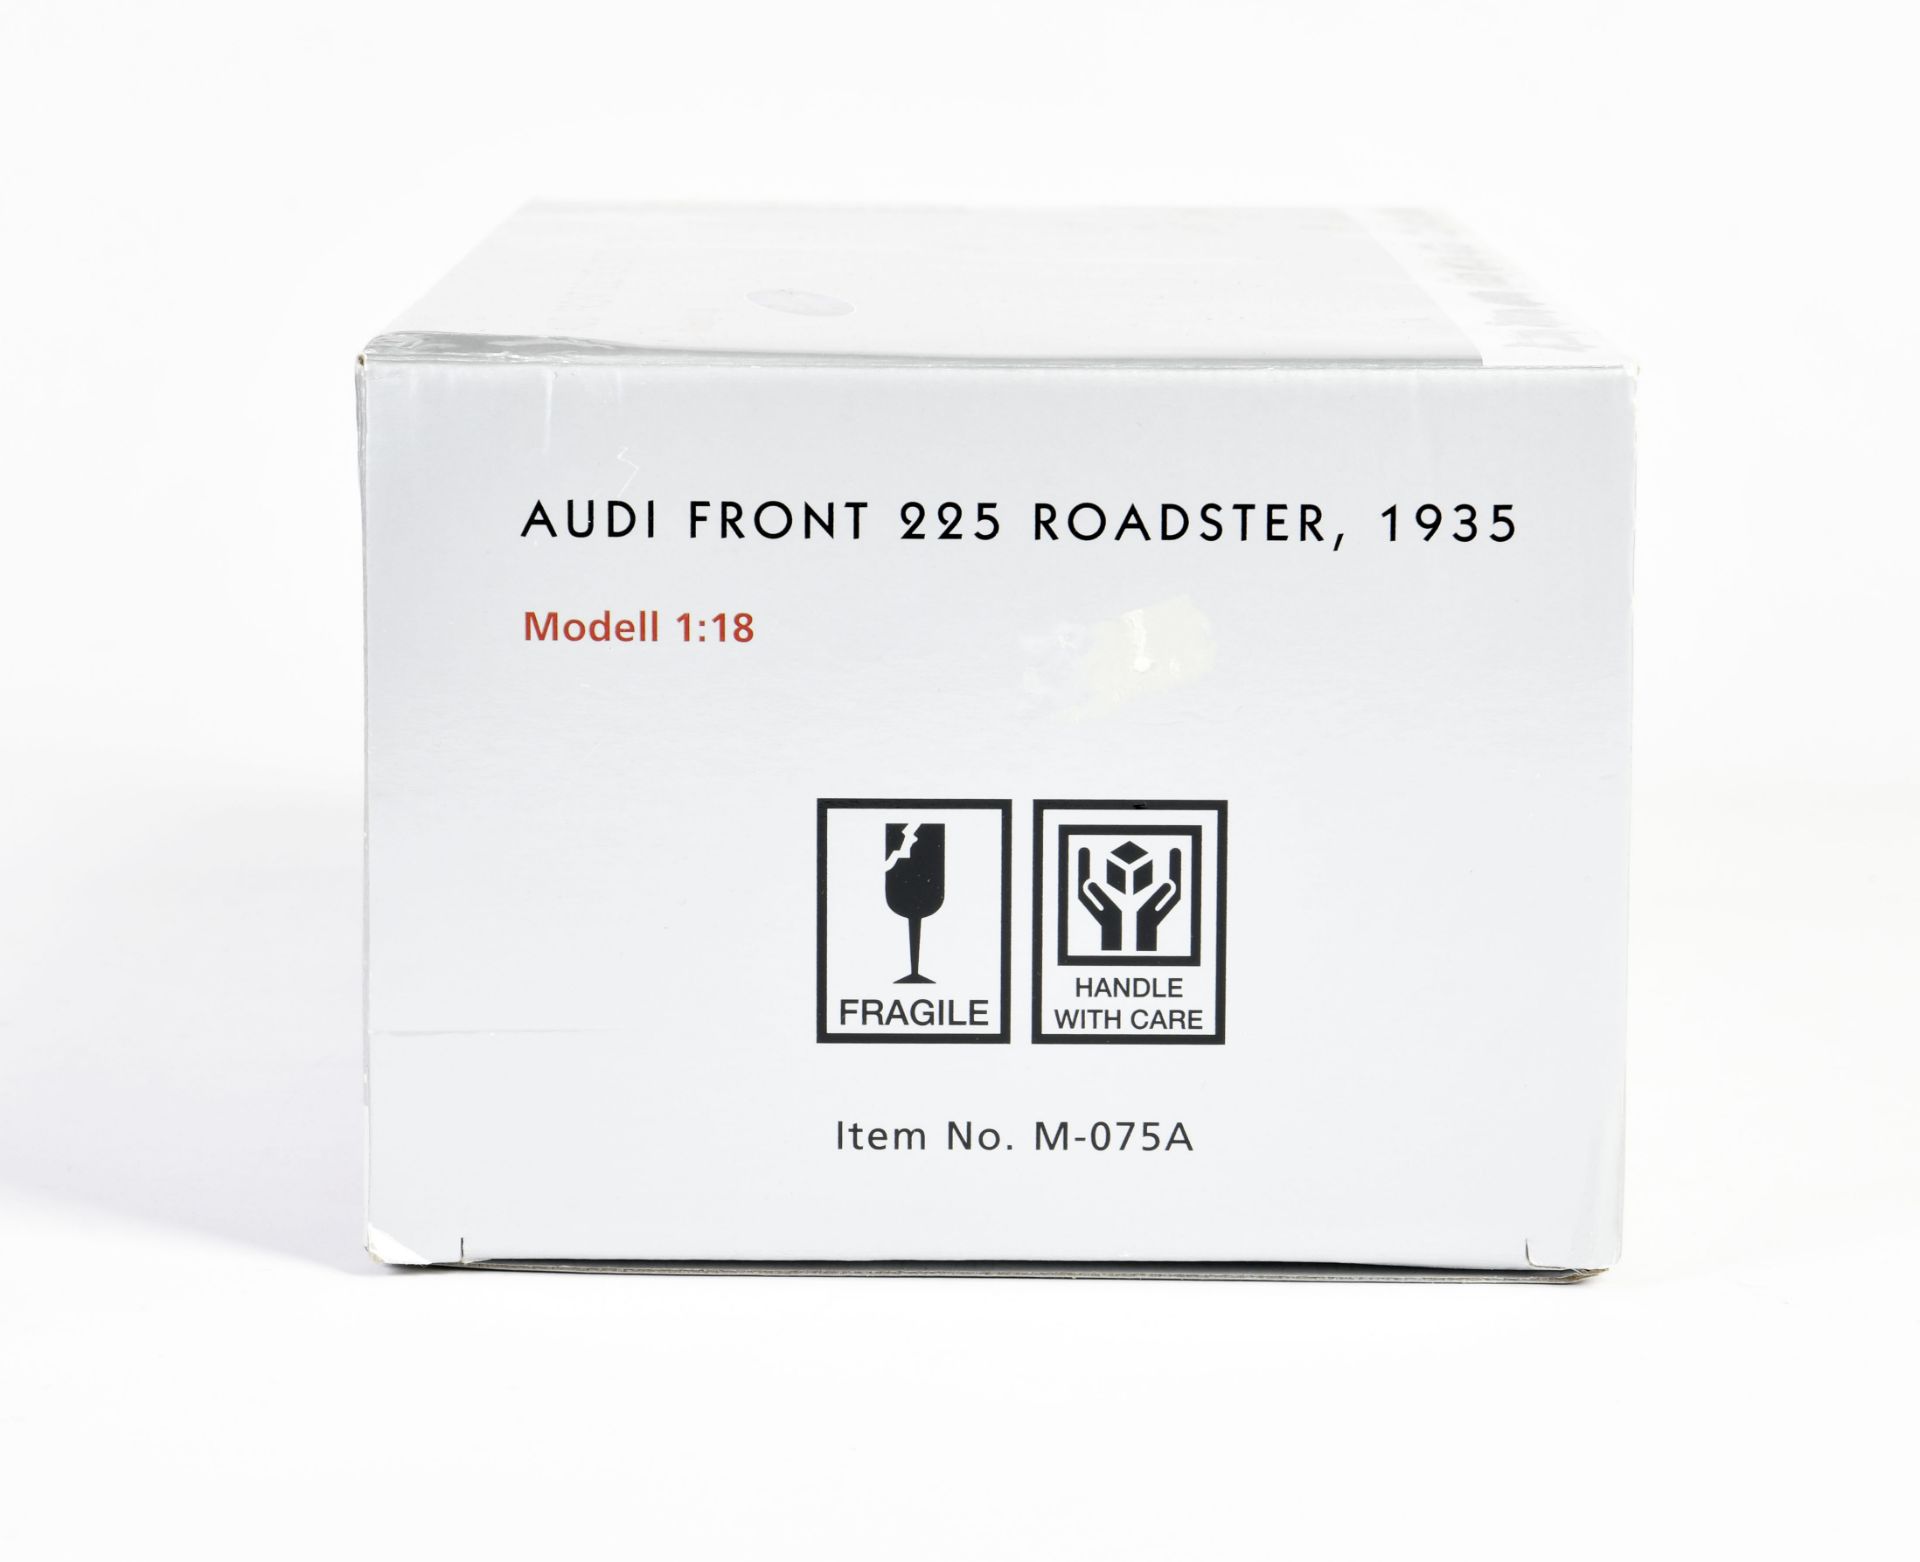 CMC, Audi Front 225 Roadster, 1935, 1:18, box, C 1 - Image 2 of 2